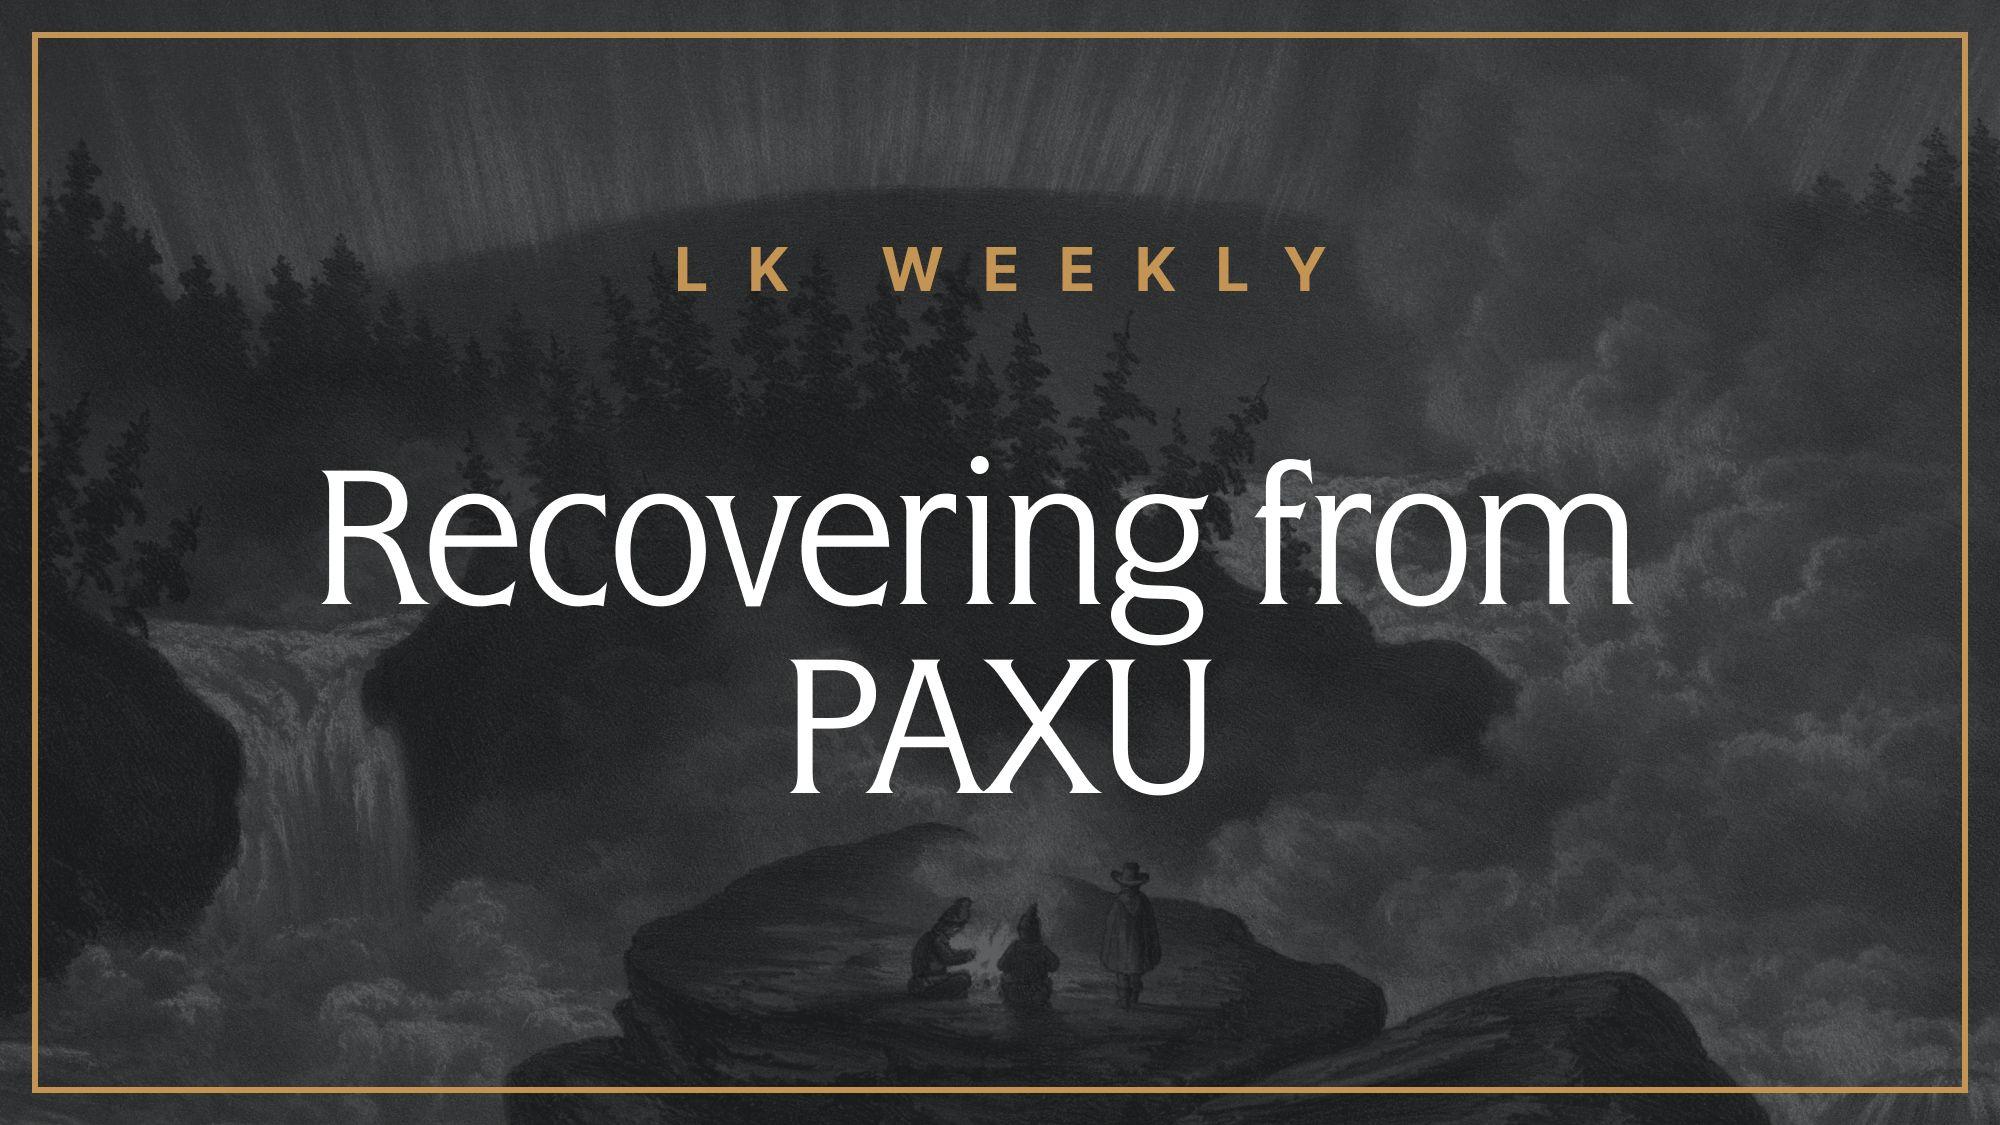 LK Weekly: Recovering from PAXU